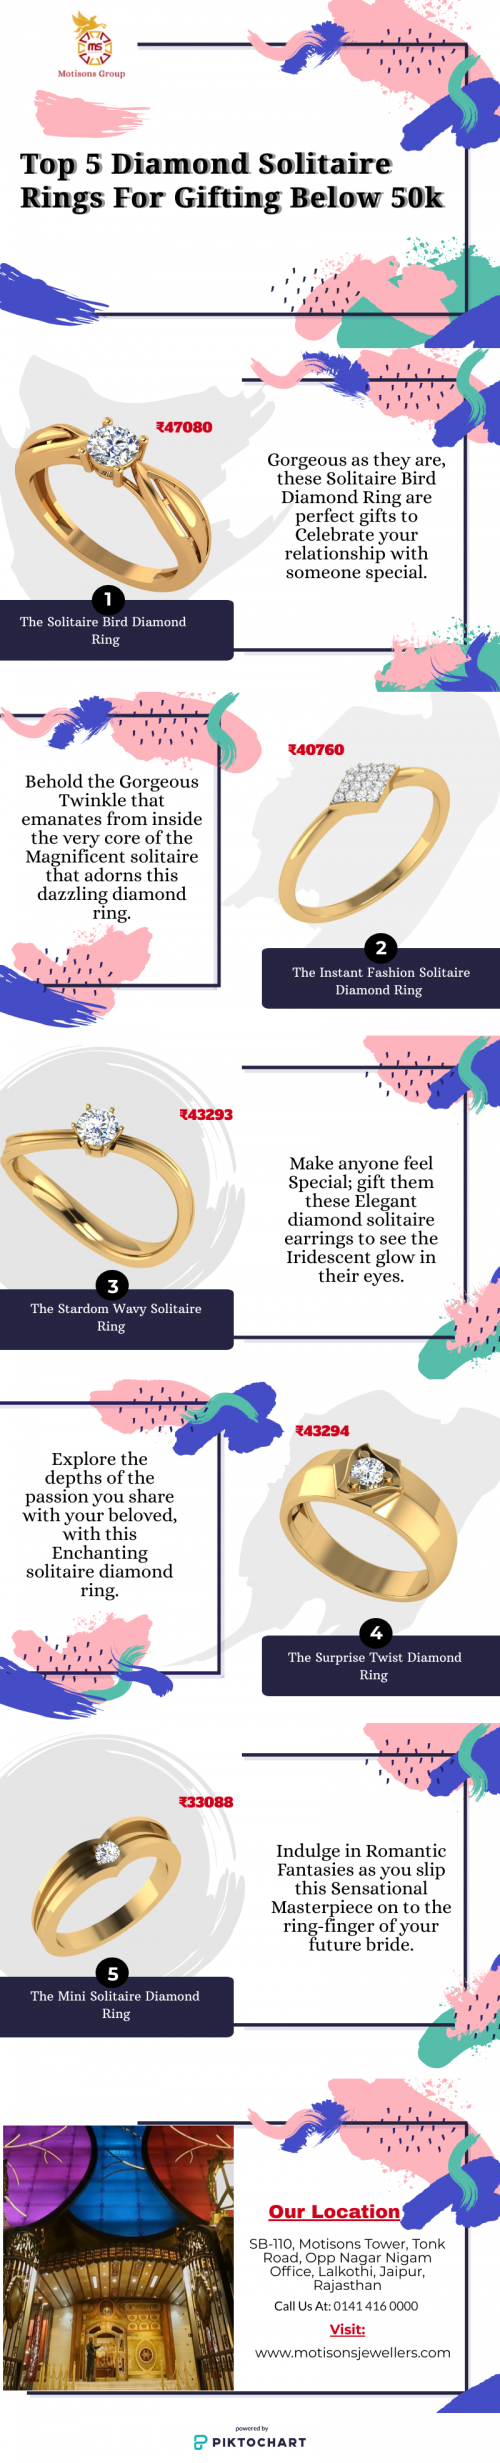 It’s now easier to be extravagant! Ten breathtakingly beautiful Diamond Solitaire Rings to enthrall your precious beloved. Visit the online stores of Motisons Jewellers and explore the amazing varieties of diamond rings.
https://www.motisonsjewellers.com/jewelry/ring